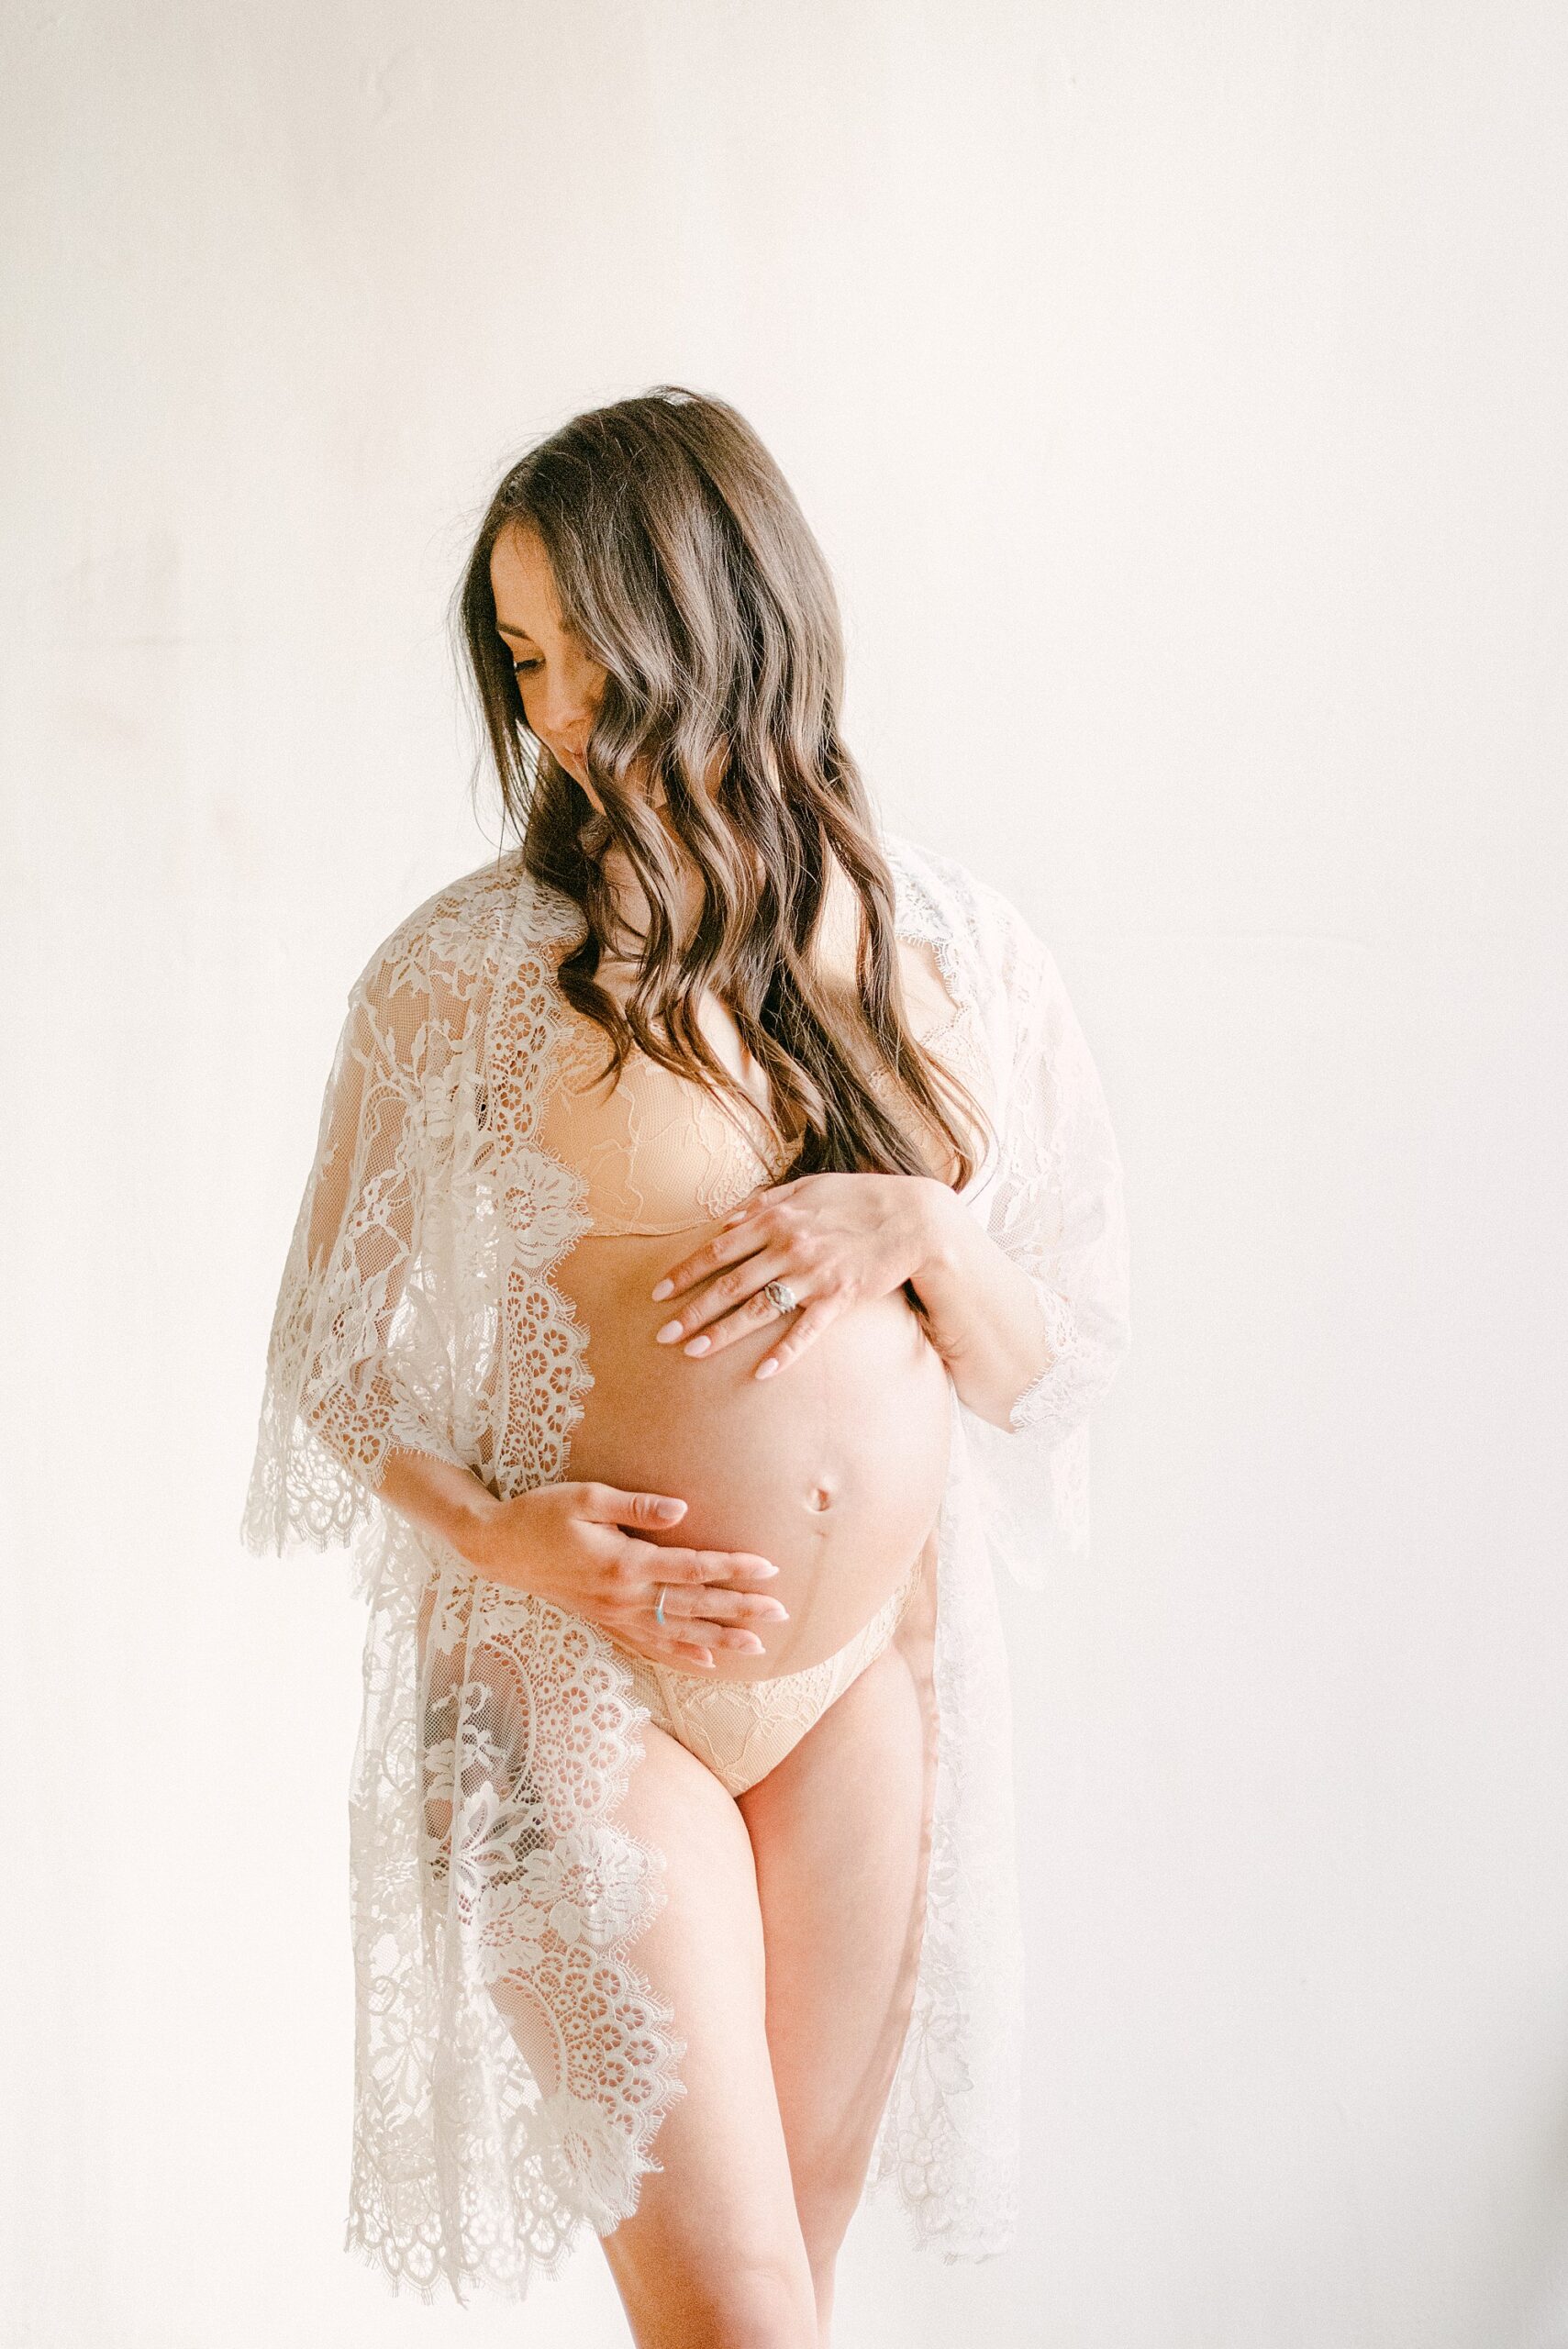 Pregnant mom holding baby bump while wearing pink lingerie and white lace robe. She is facing her shoulder and hair falling over face.